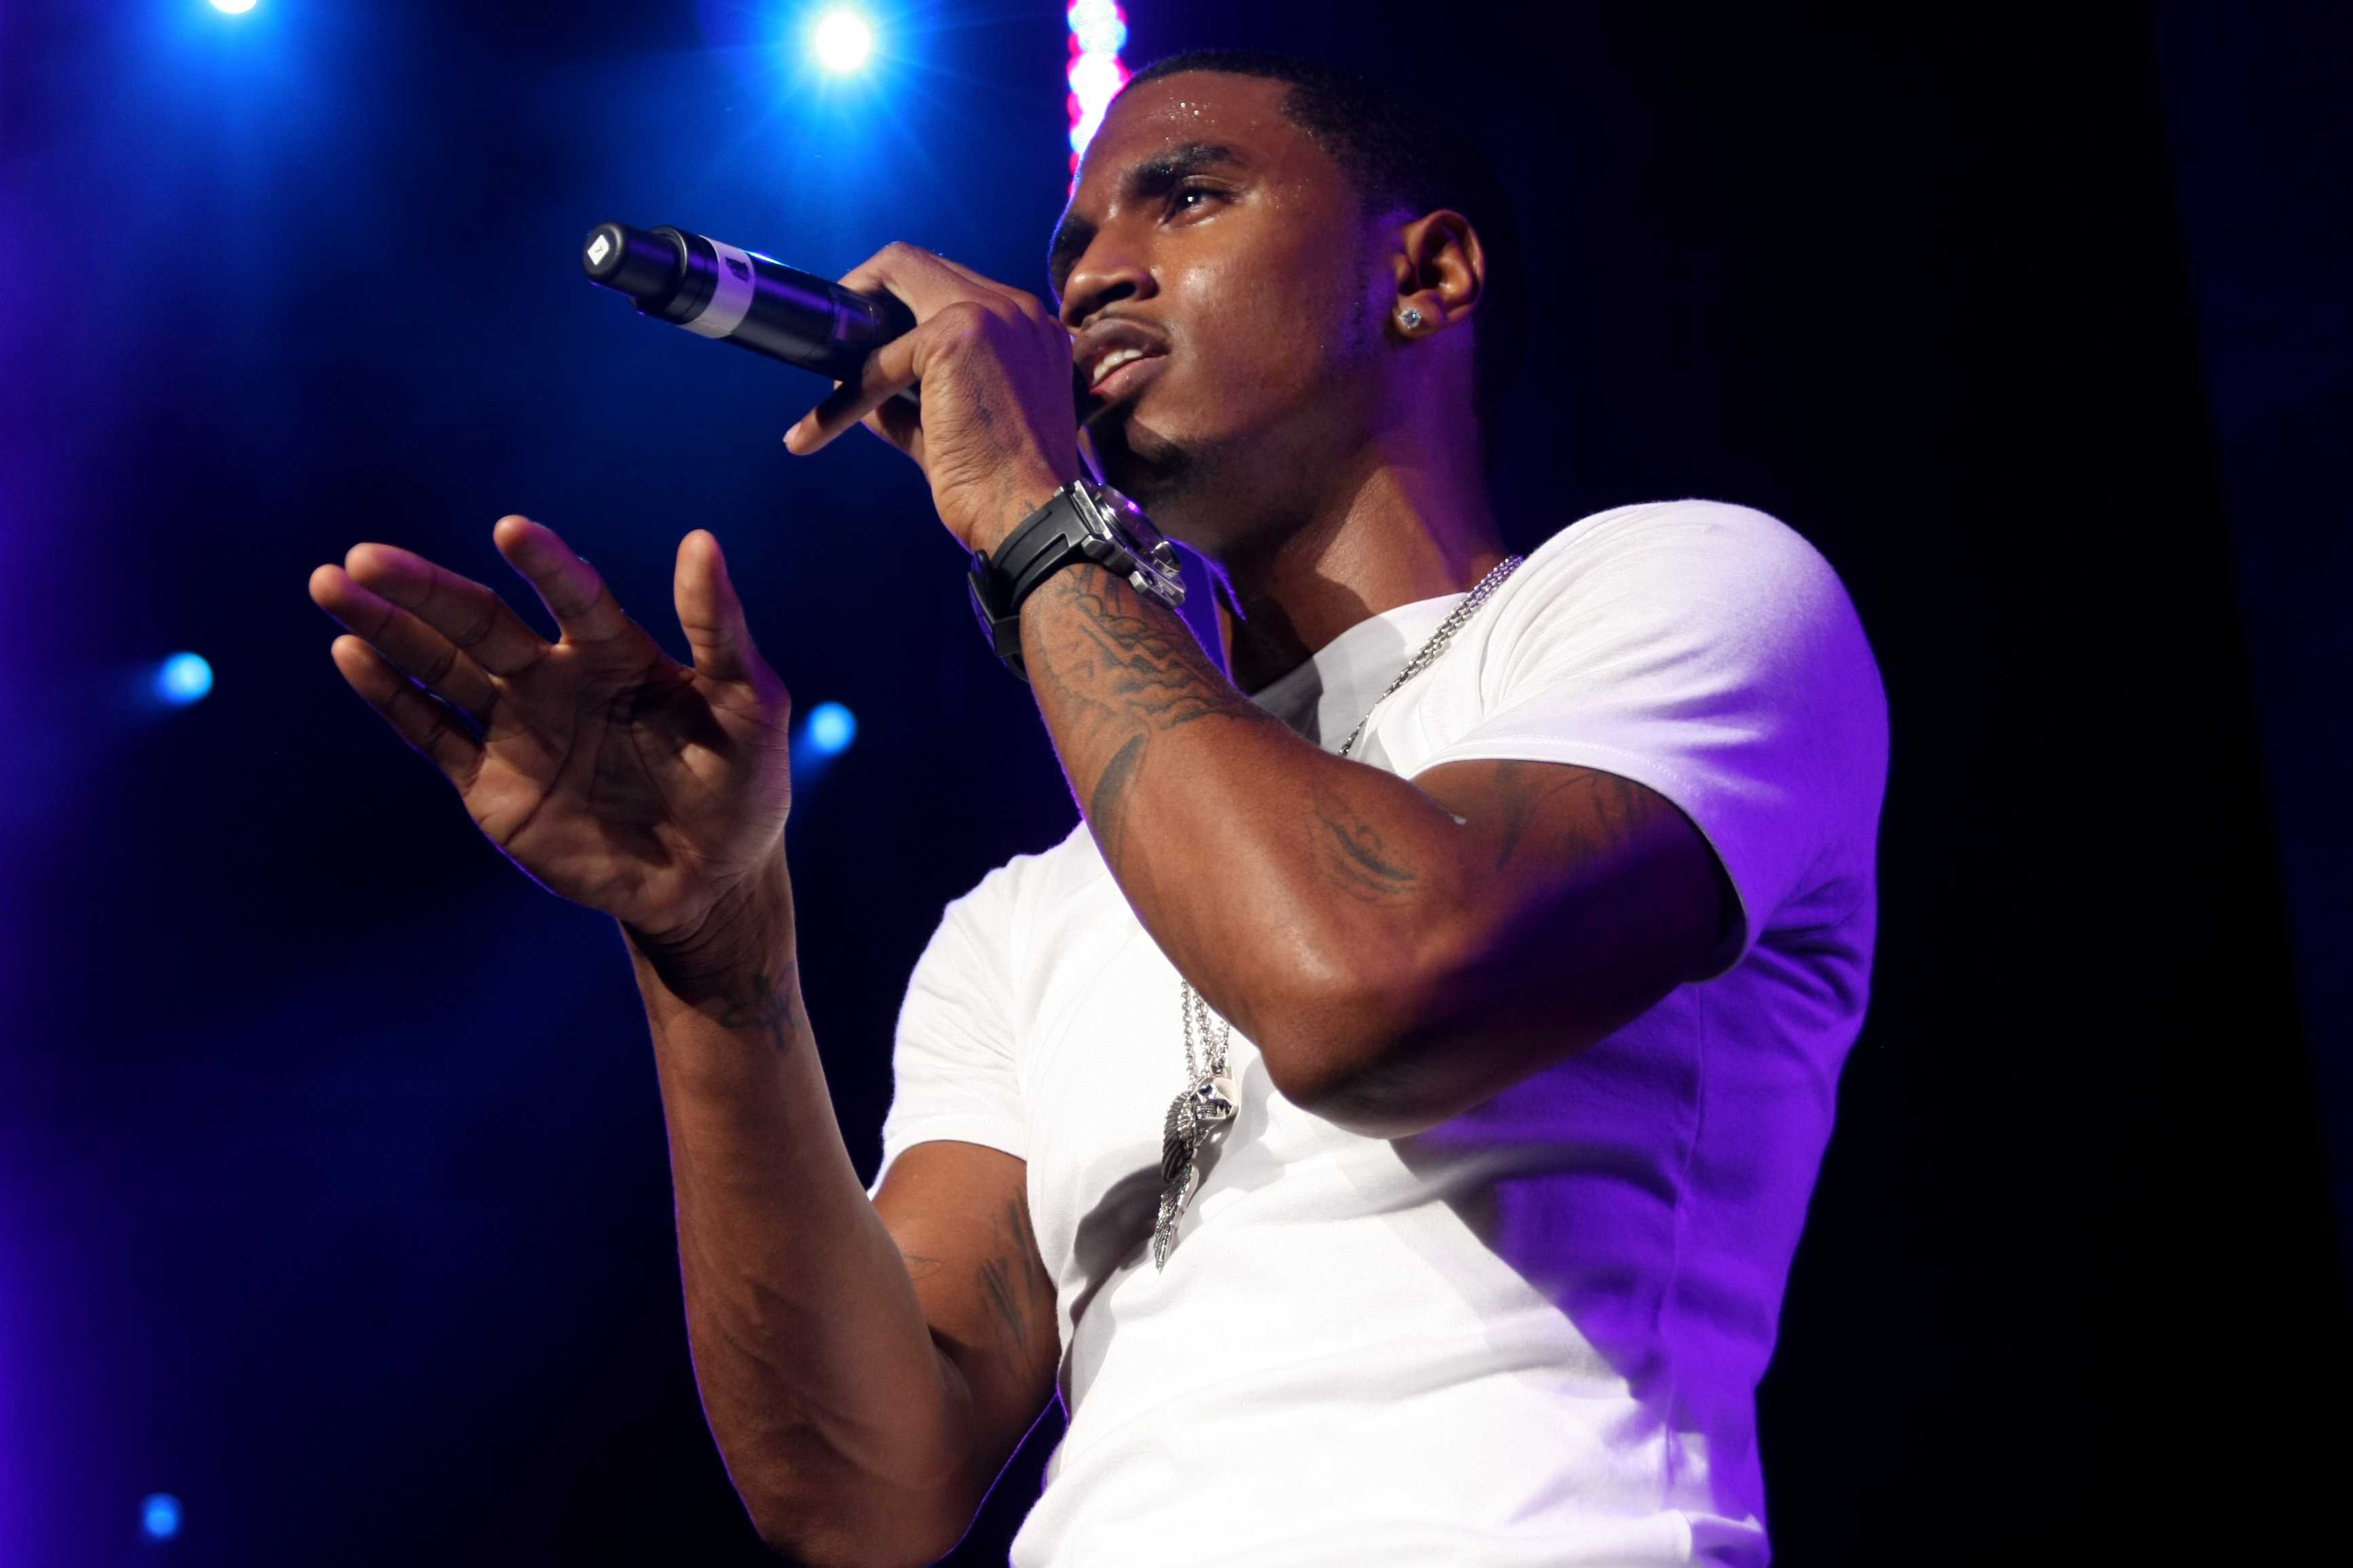 Trey Songz ties newest album, music videos with satirical reality show  episodes · The Badger Herald